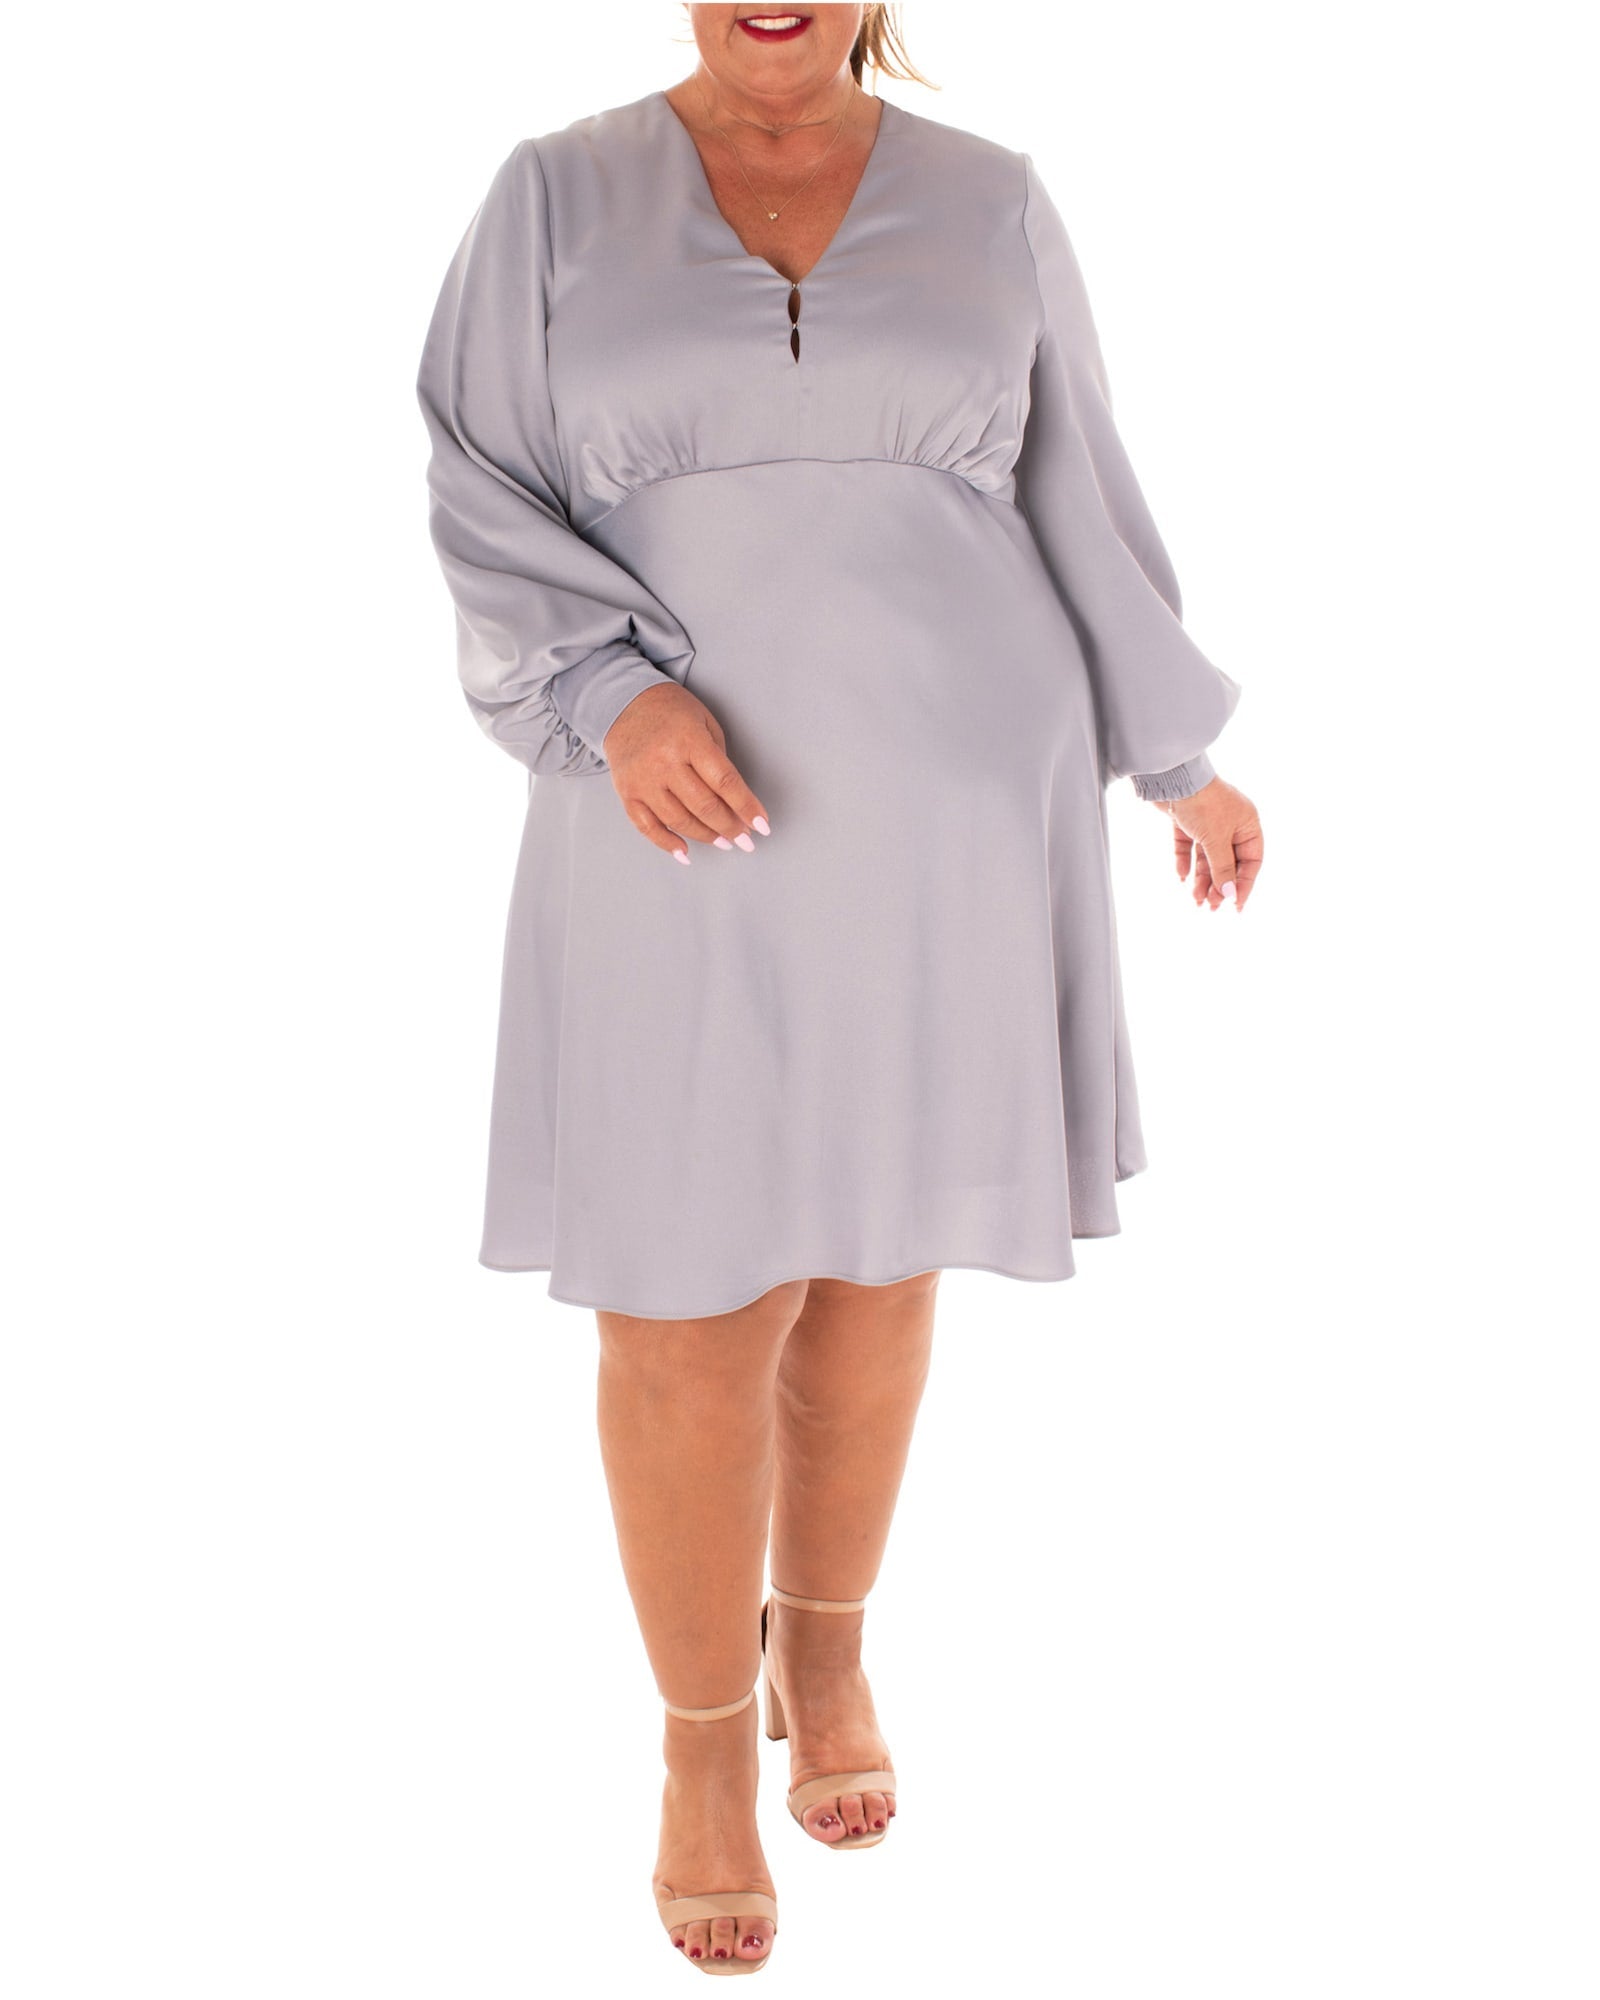 SOLID SATIN BACK CREPE FULLY LINED DRESS W/SMOCKING @ BACK SIDE OF CUFF | SMOKE GREY